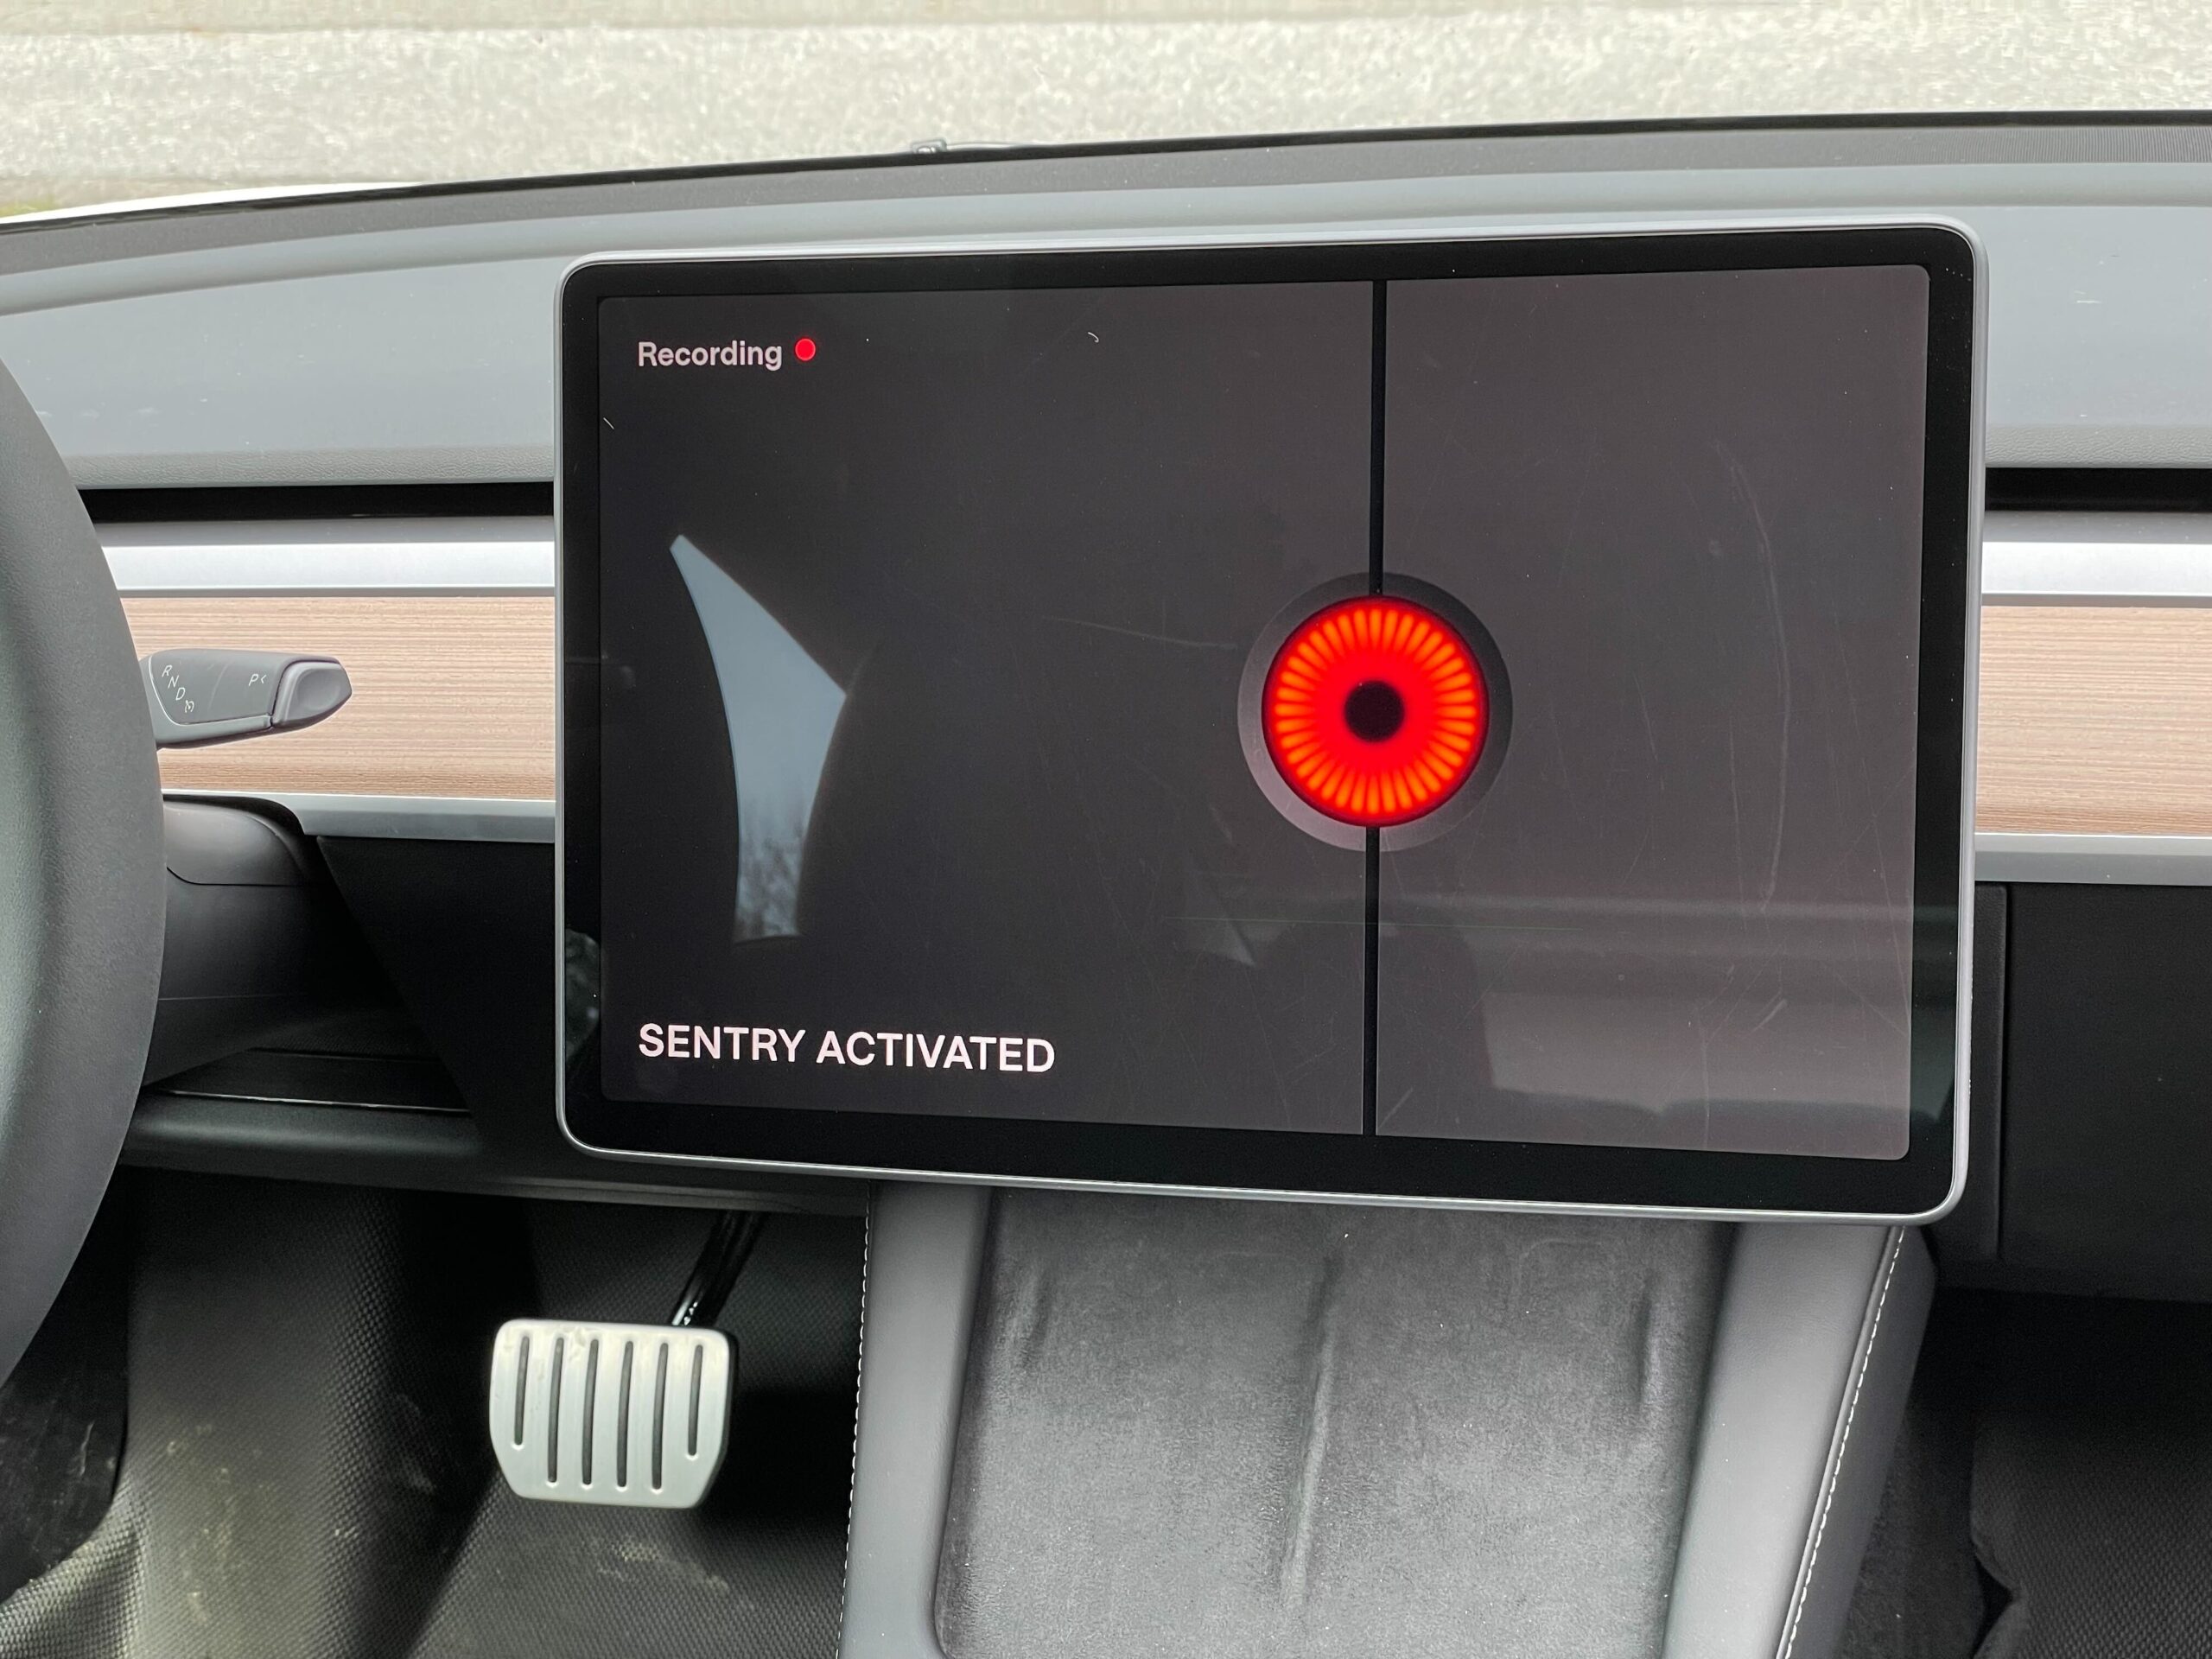 Lawsuit Accuses Tesla of ‘Tasteless’ Sentry Mode Video Sharing Without Consent